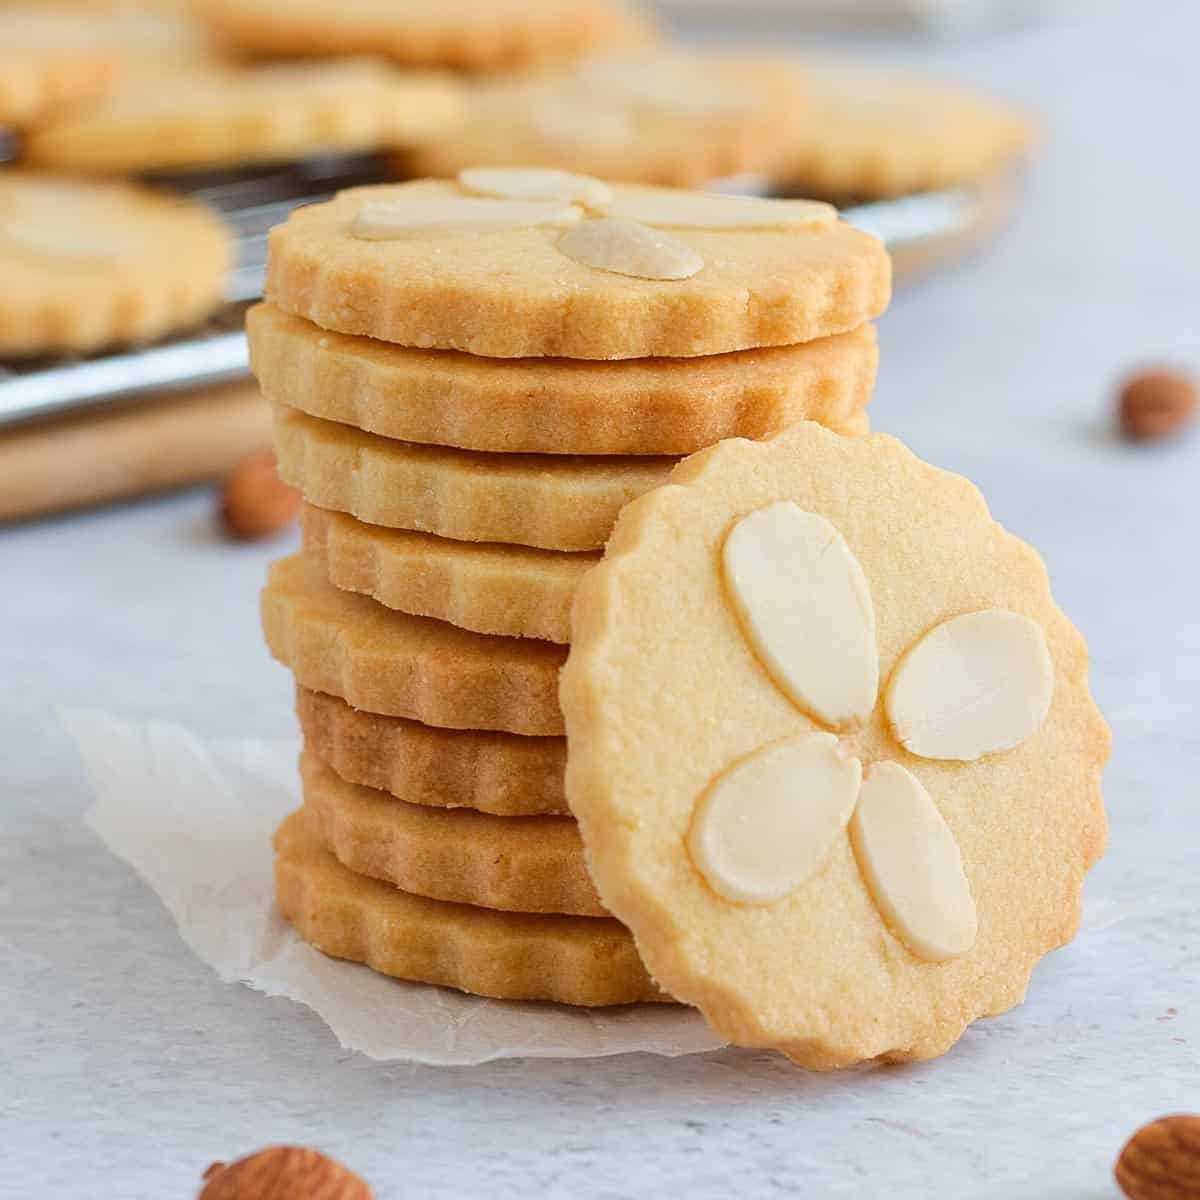 A stack of cookies with almond slivers on top.